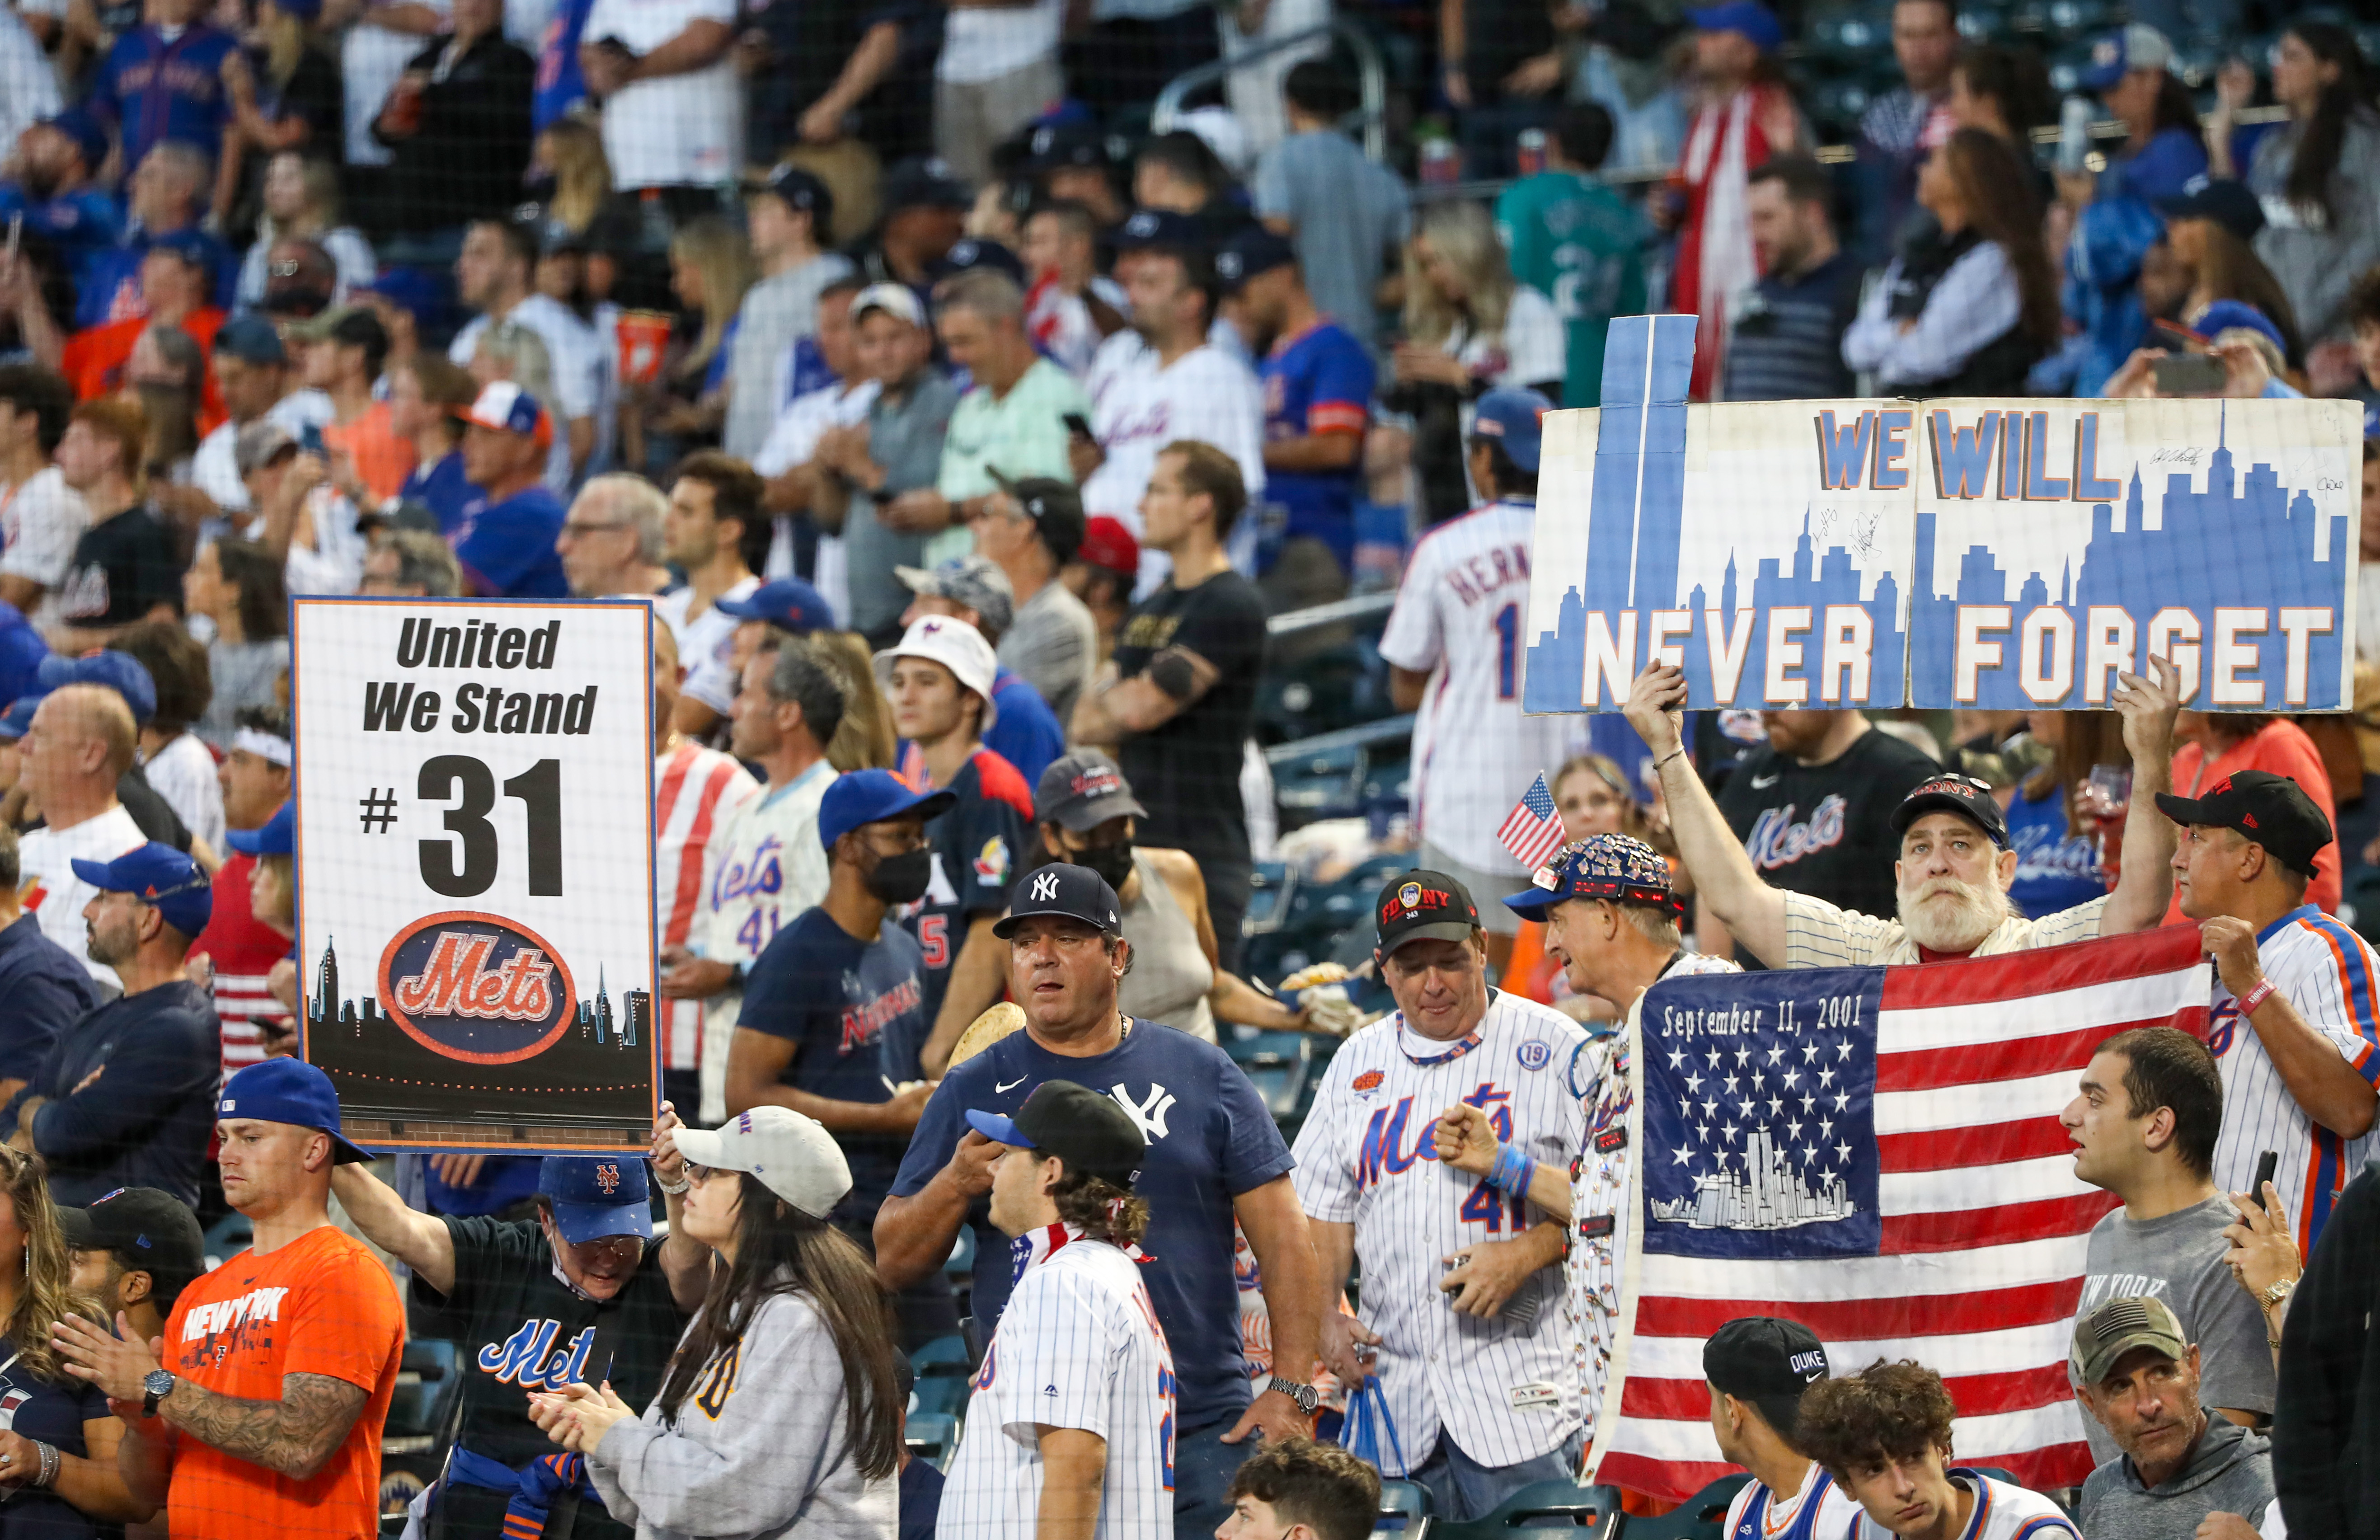 Mets, Yankees and more pay tribute on 9/11 20th anniversary